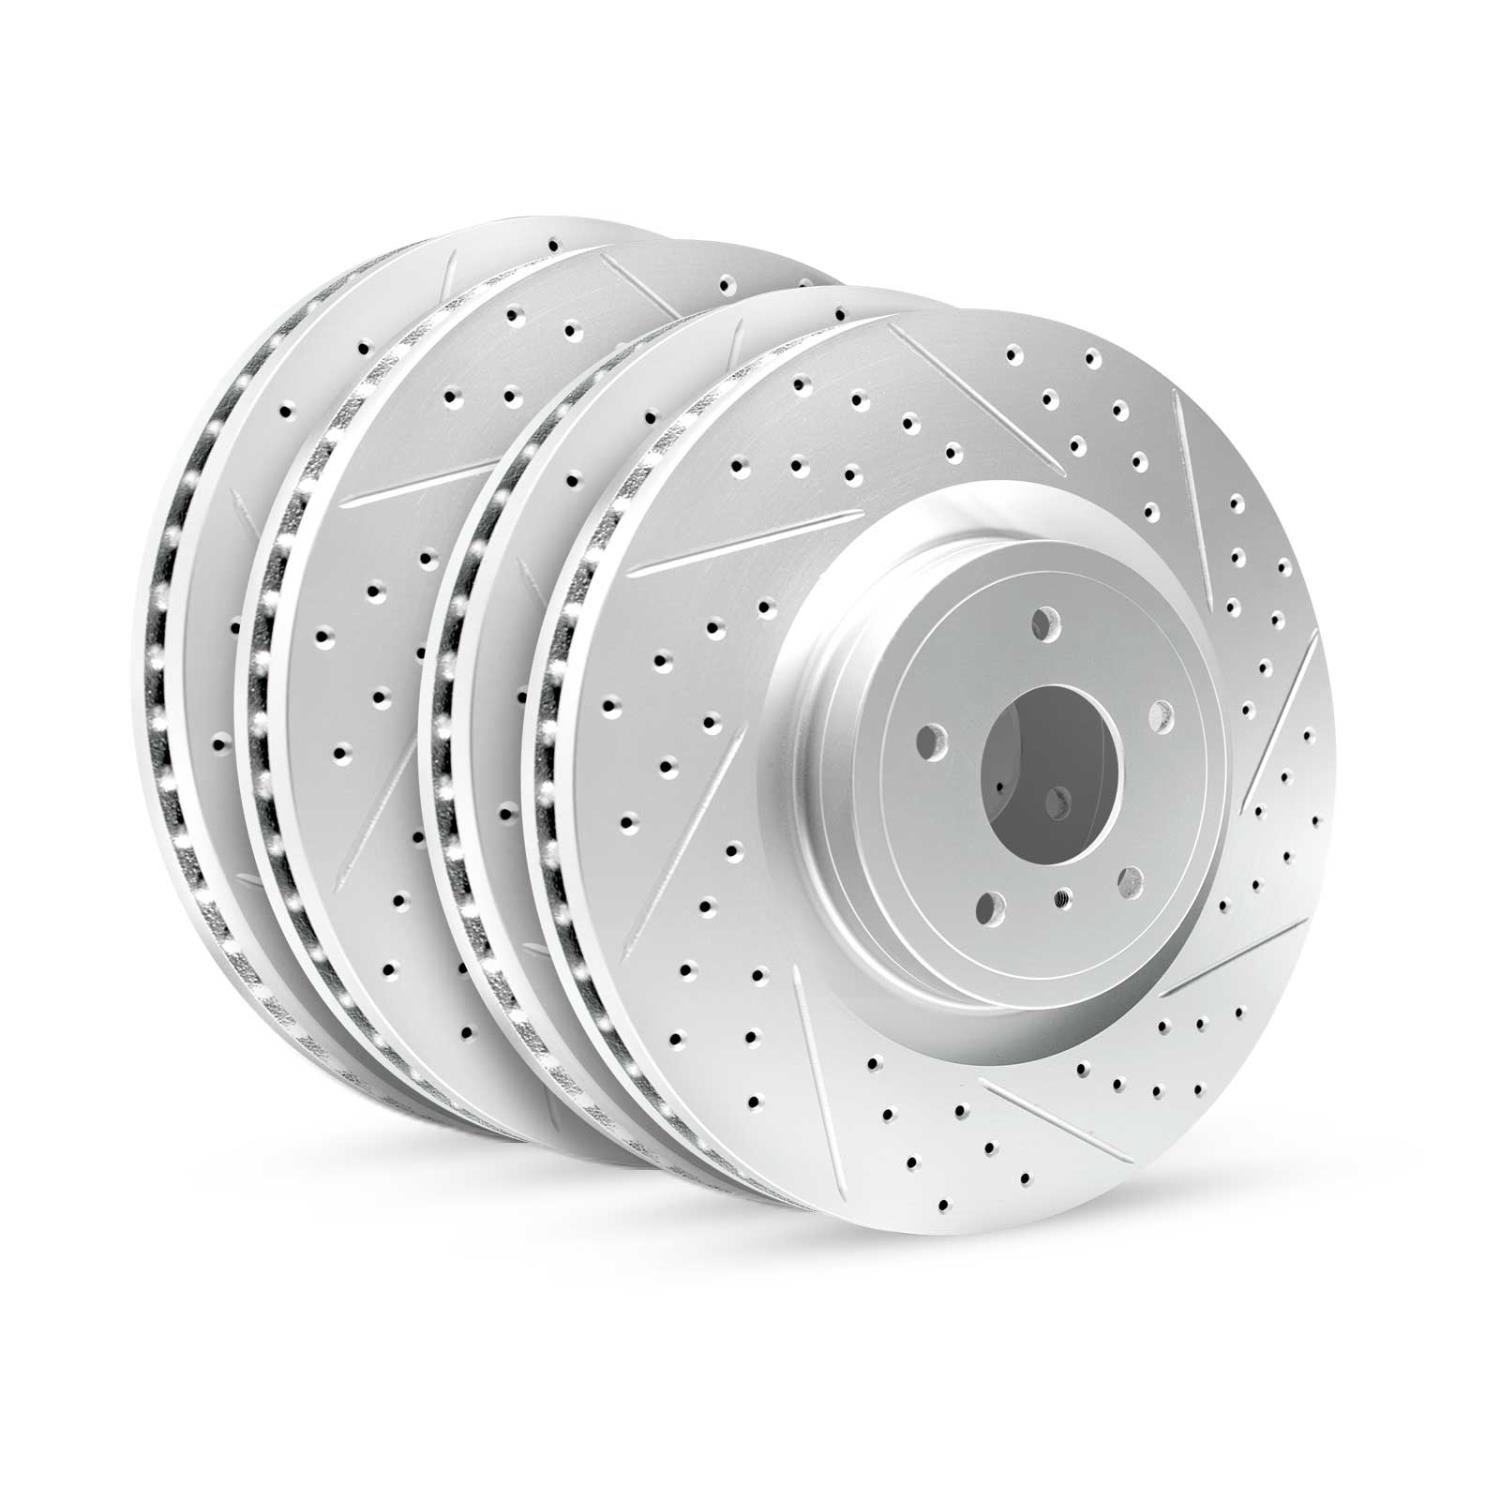 GEO-Carbon Drilled/Slotted Rotors, 2000-2004 Subaru, Position: